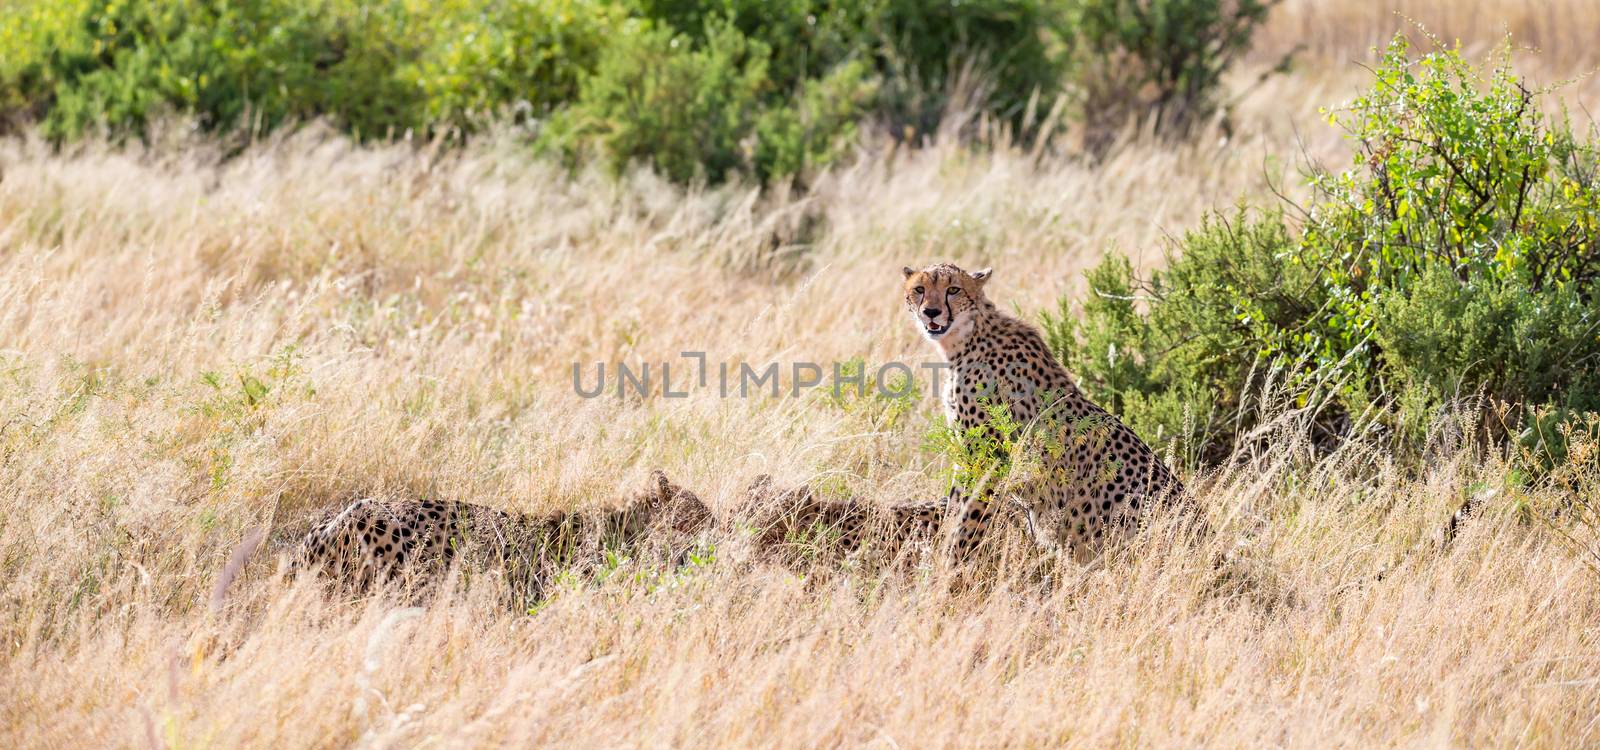 The cheetahs eating in the middle of the grass